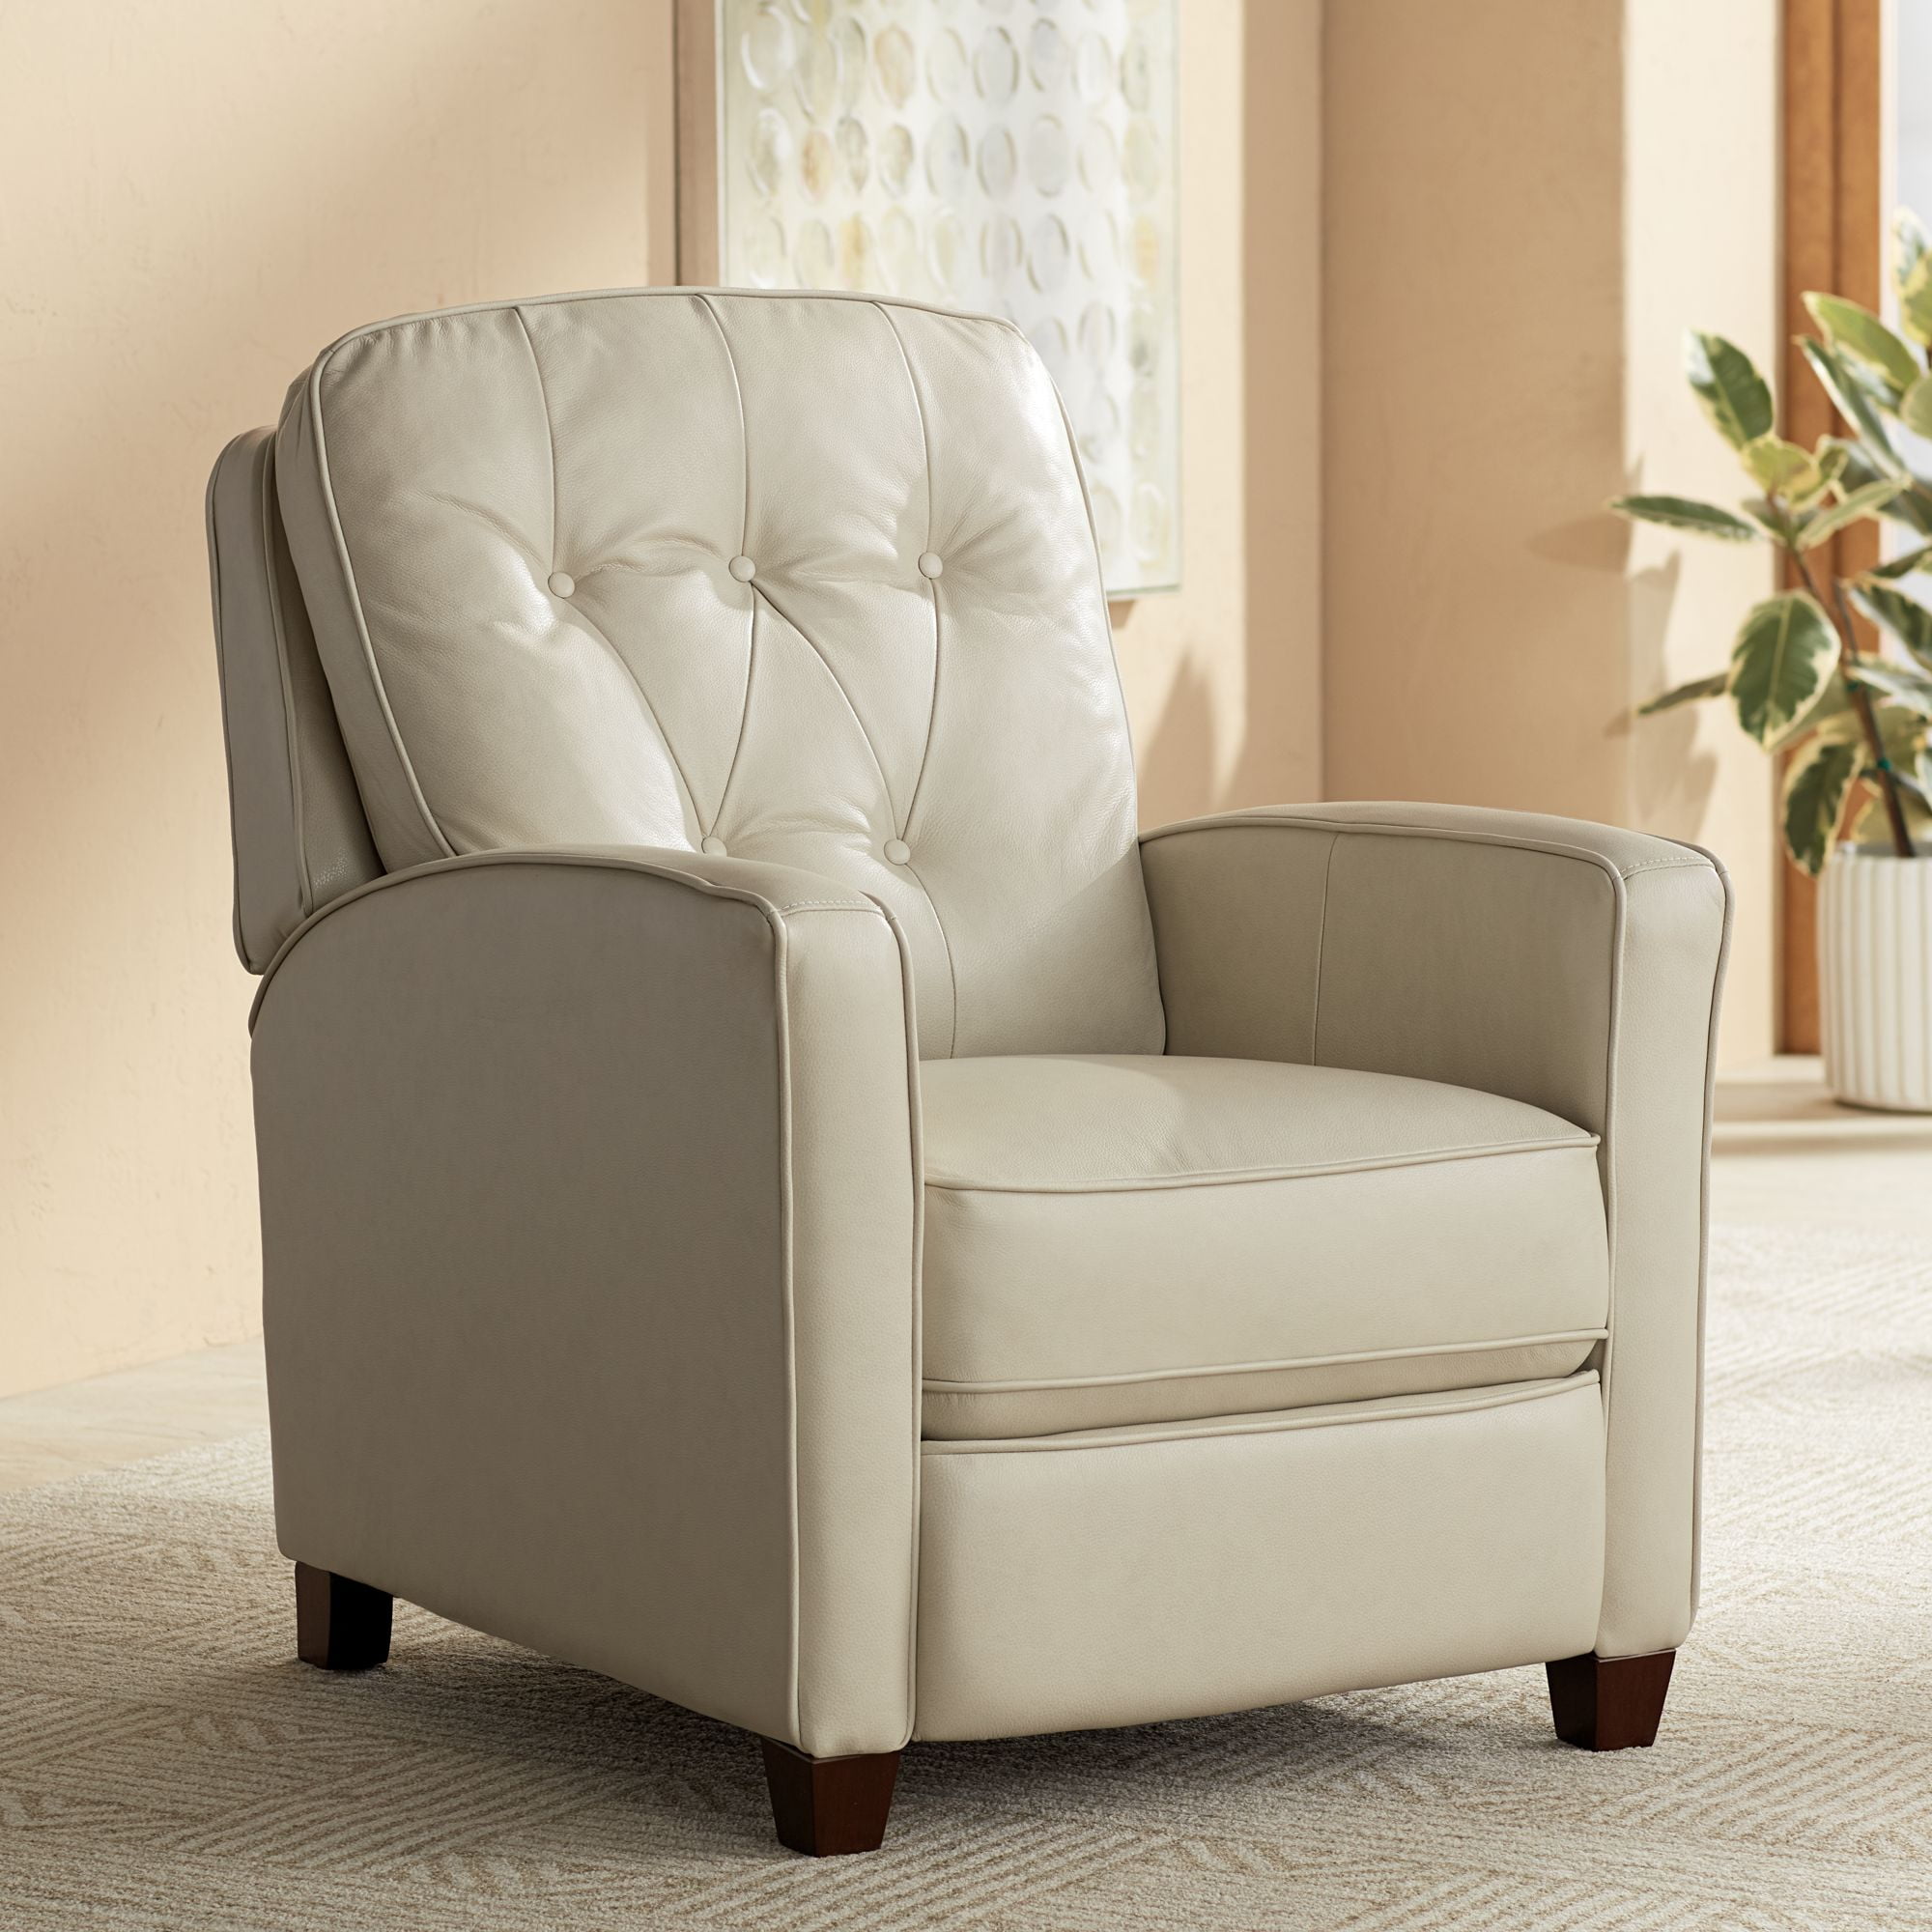 Elm Lane White Pearl Leather Recliner, Modern White Leather Recliner Chair